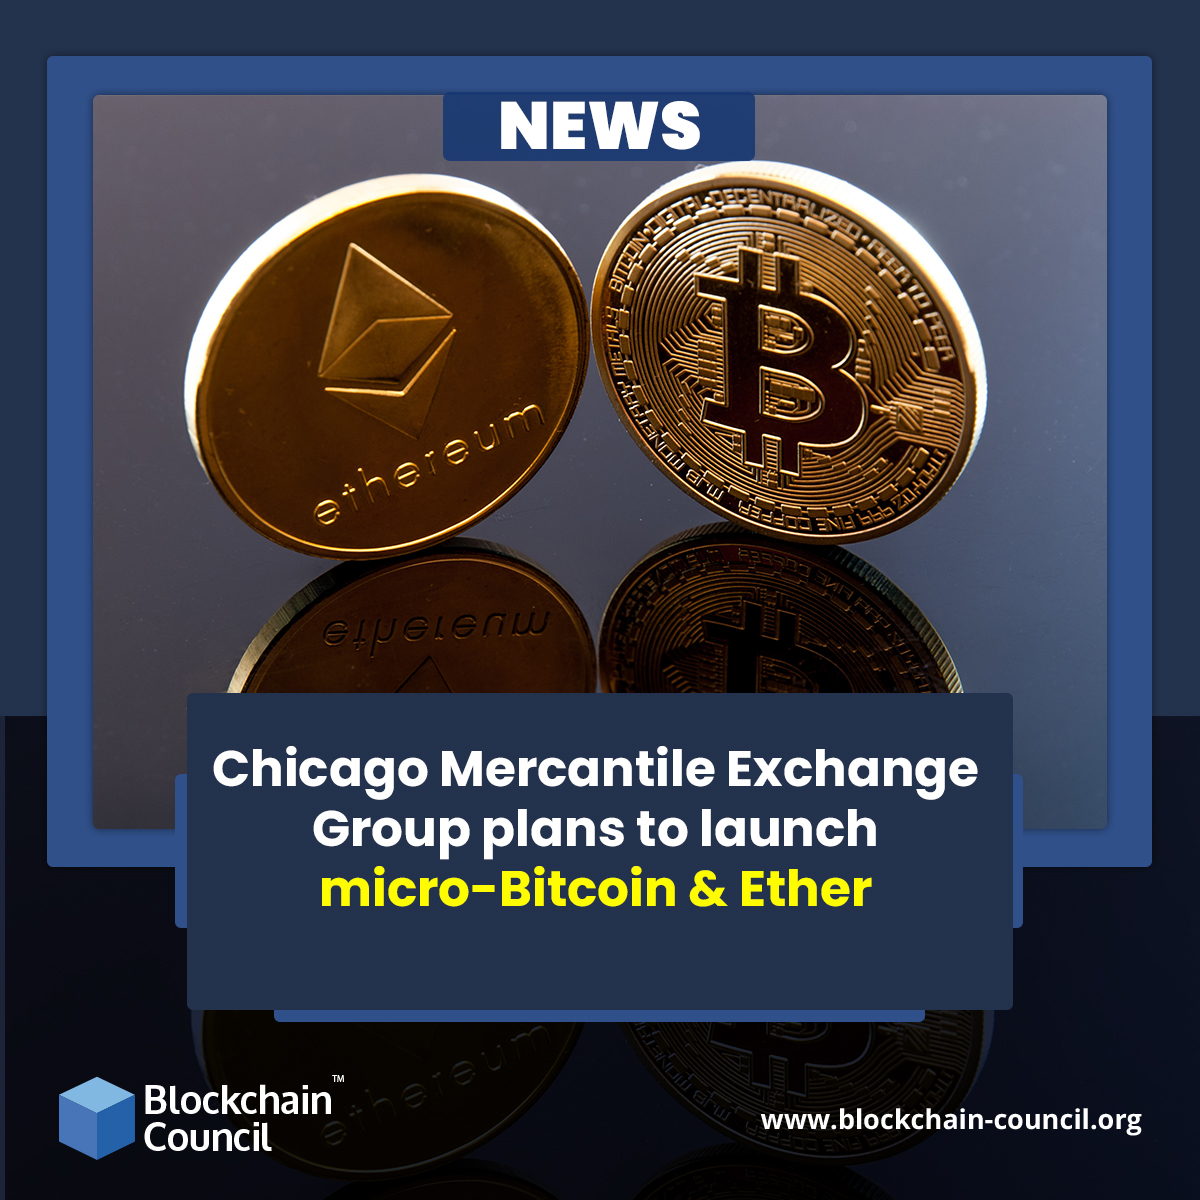 Chicago Mercantile Exchange Group plans to launch micro-Bitcoin & Ether